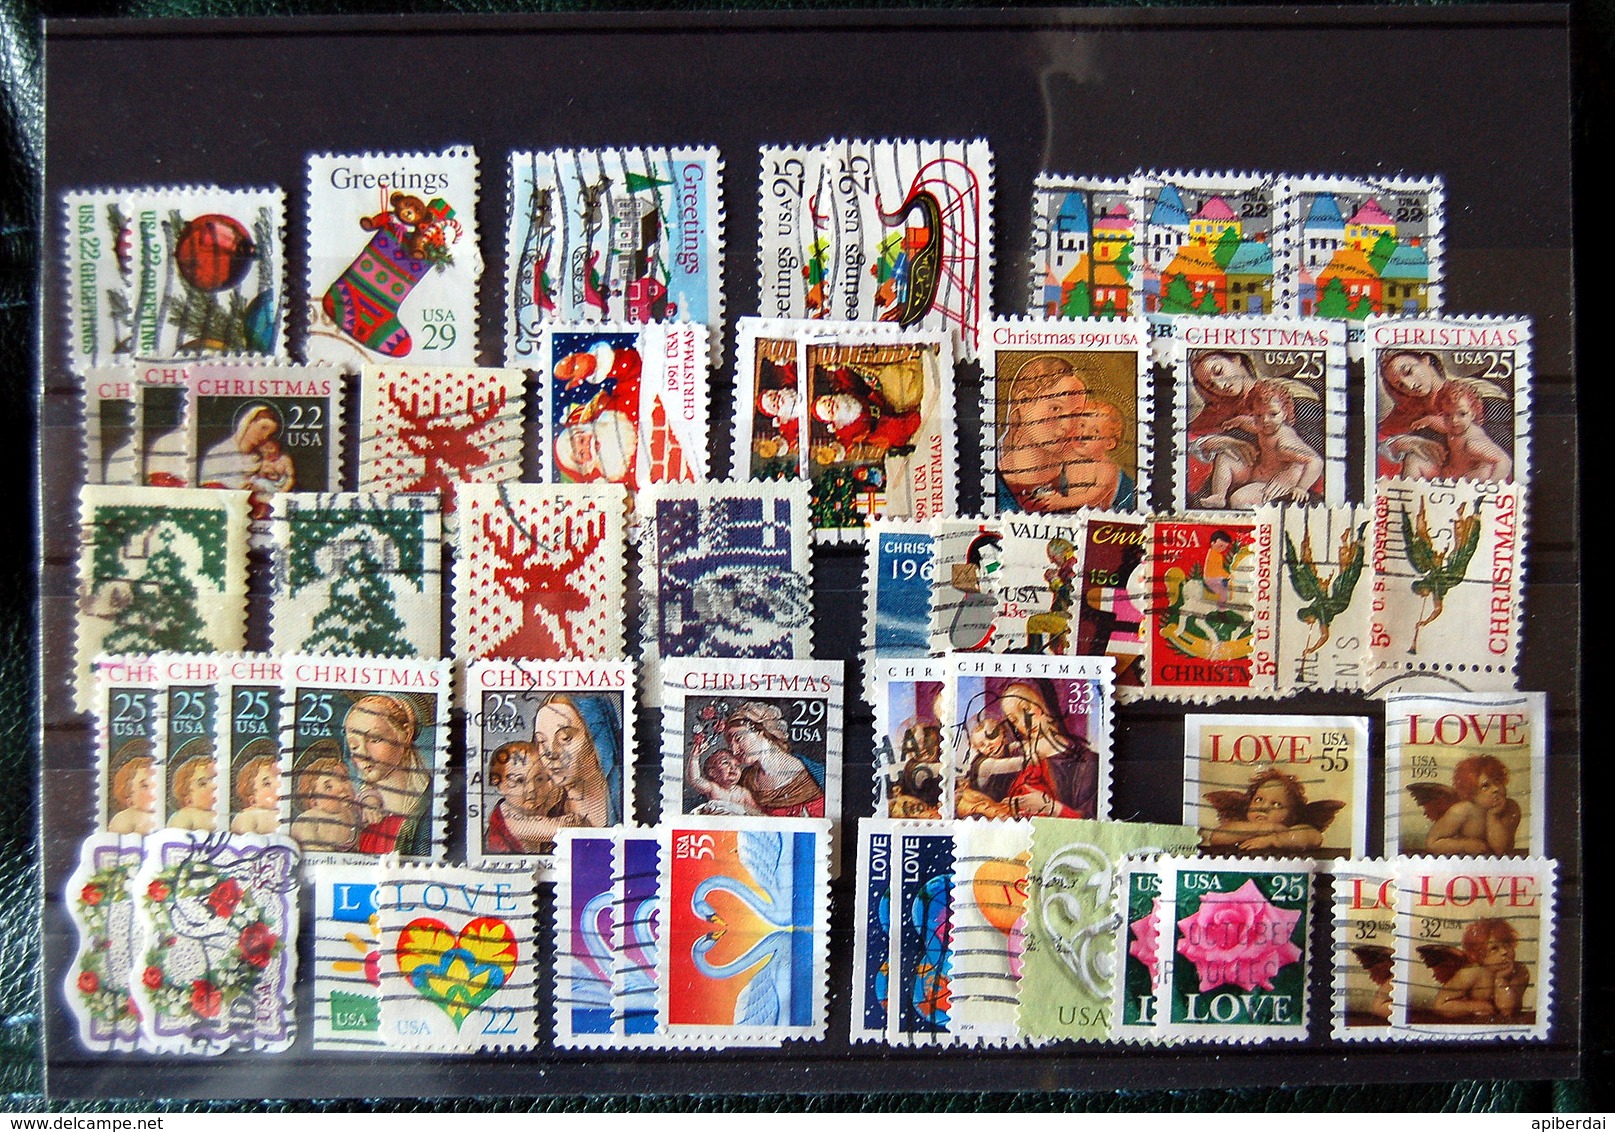 USA - Batch Of 56 Stamps With The Thema Of Christmas, Greetings And Love  (used) - Used Stamps